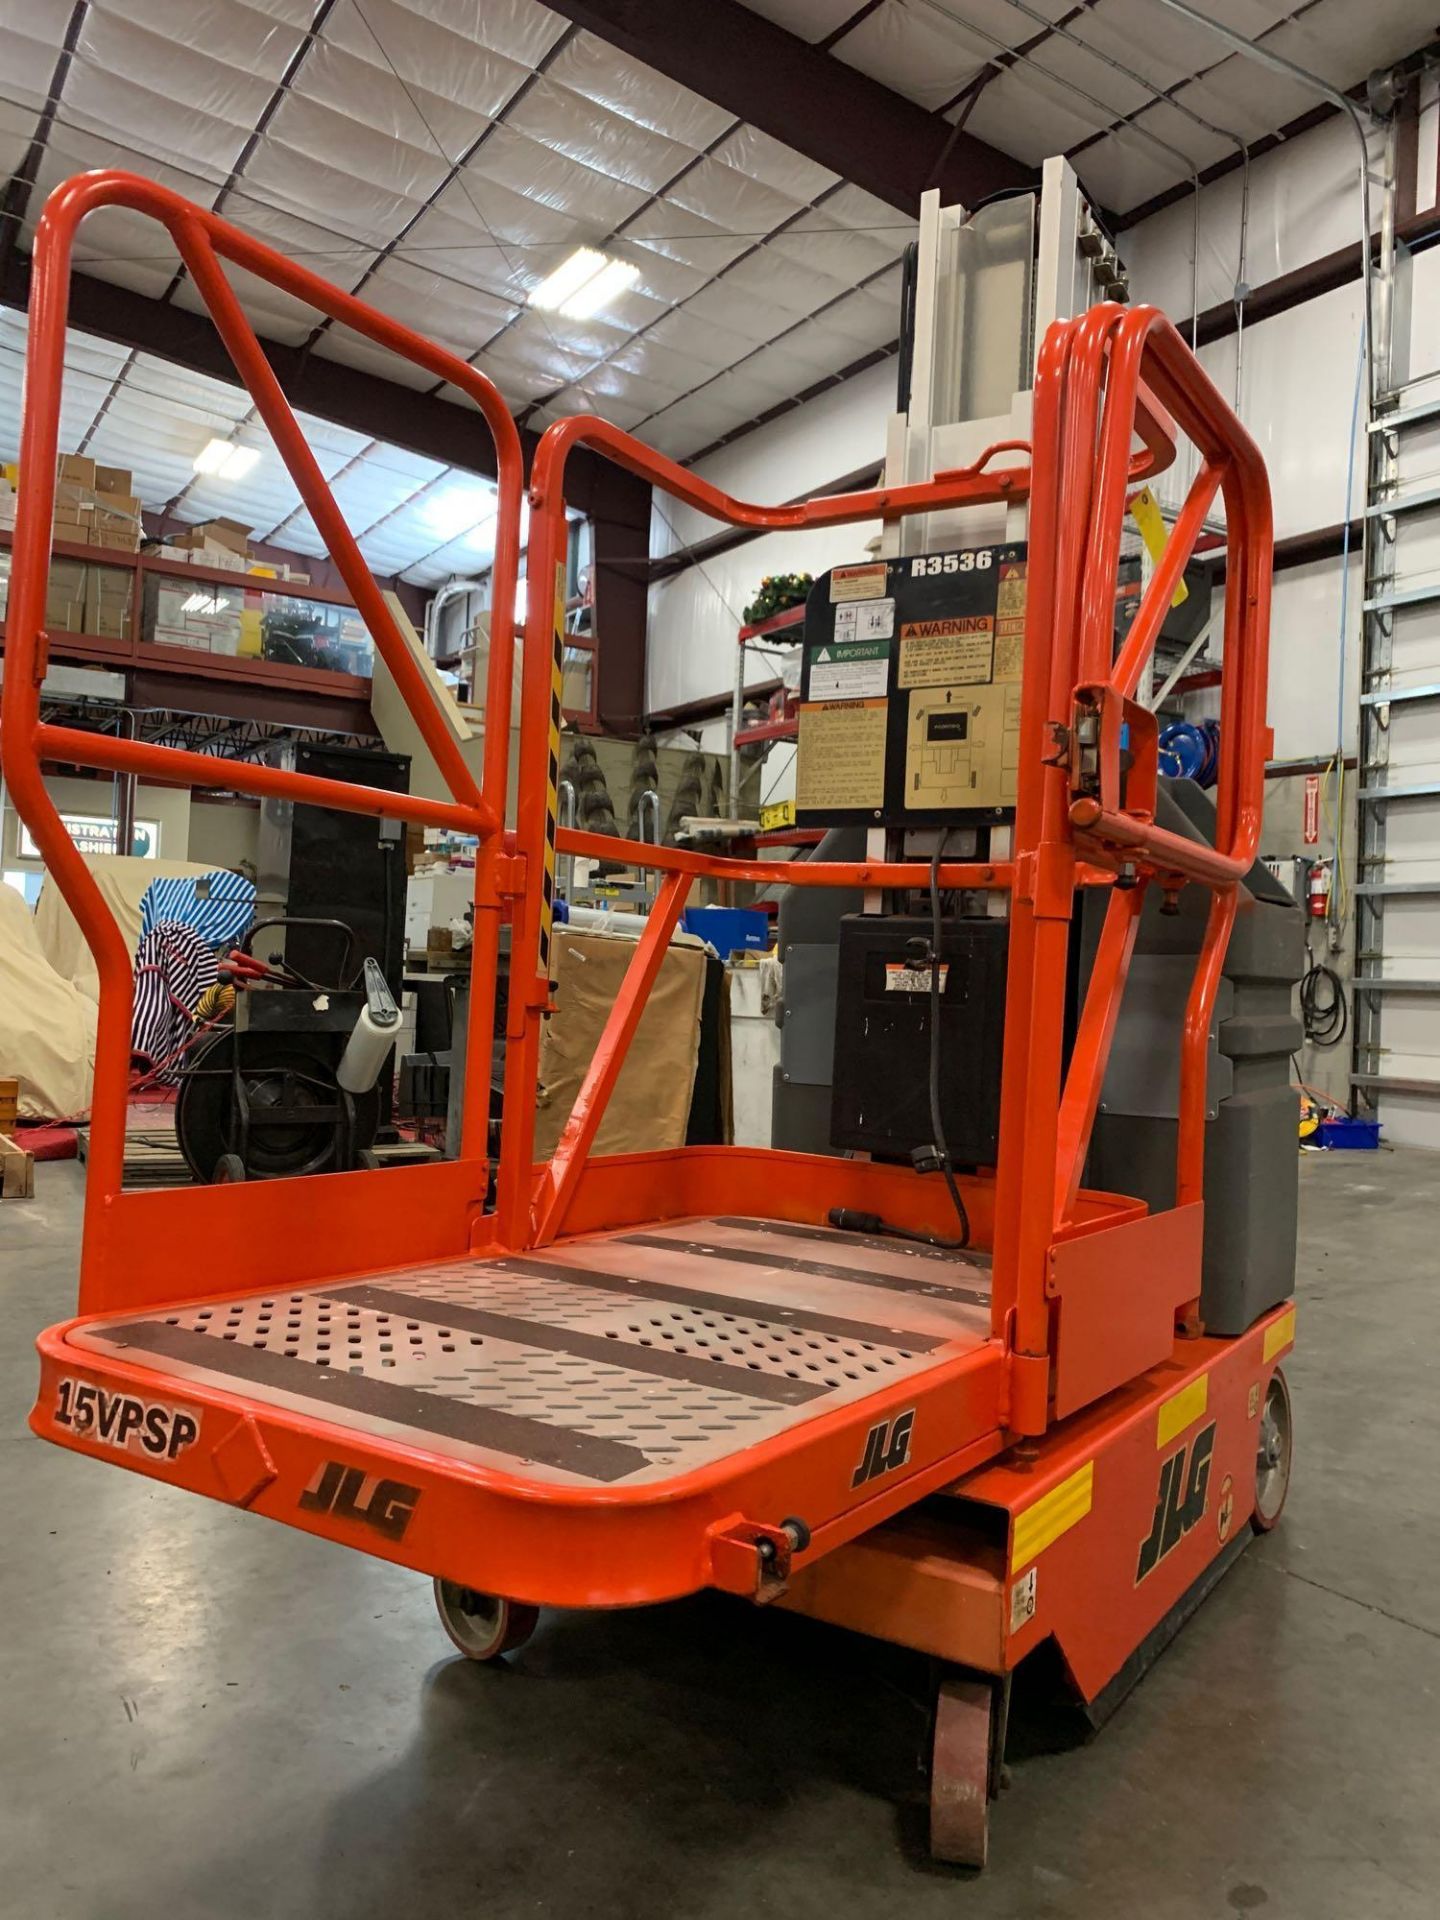 JLG 15VP SP ELECTRIC MANLIFT, SELF PROPELLED, BUILT IN CHARGER, 15’ PLATFORM HEIGHT, RUNS AND OPERAT - Image 4 of 5